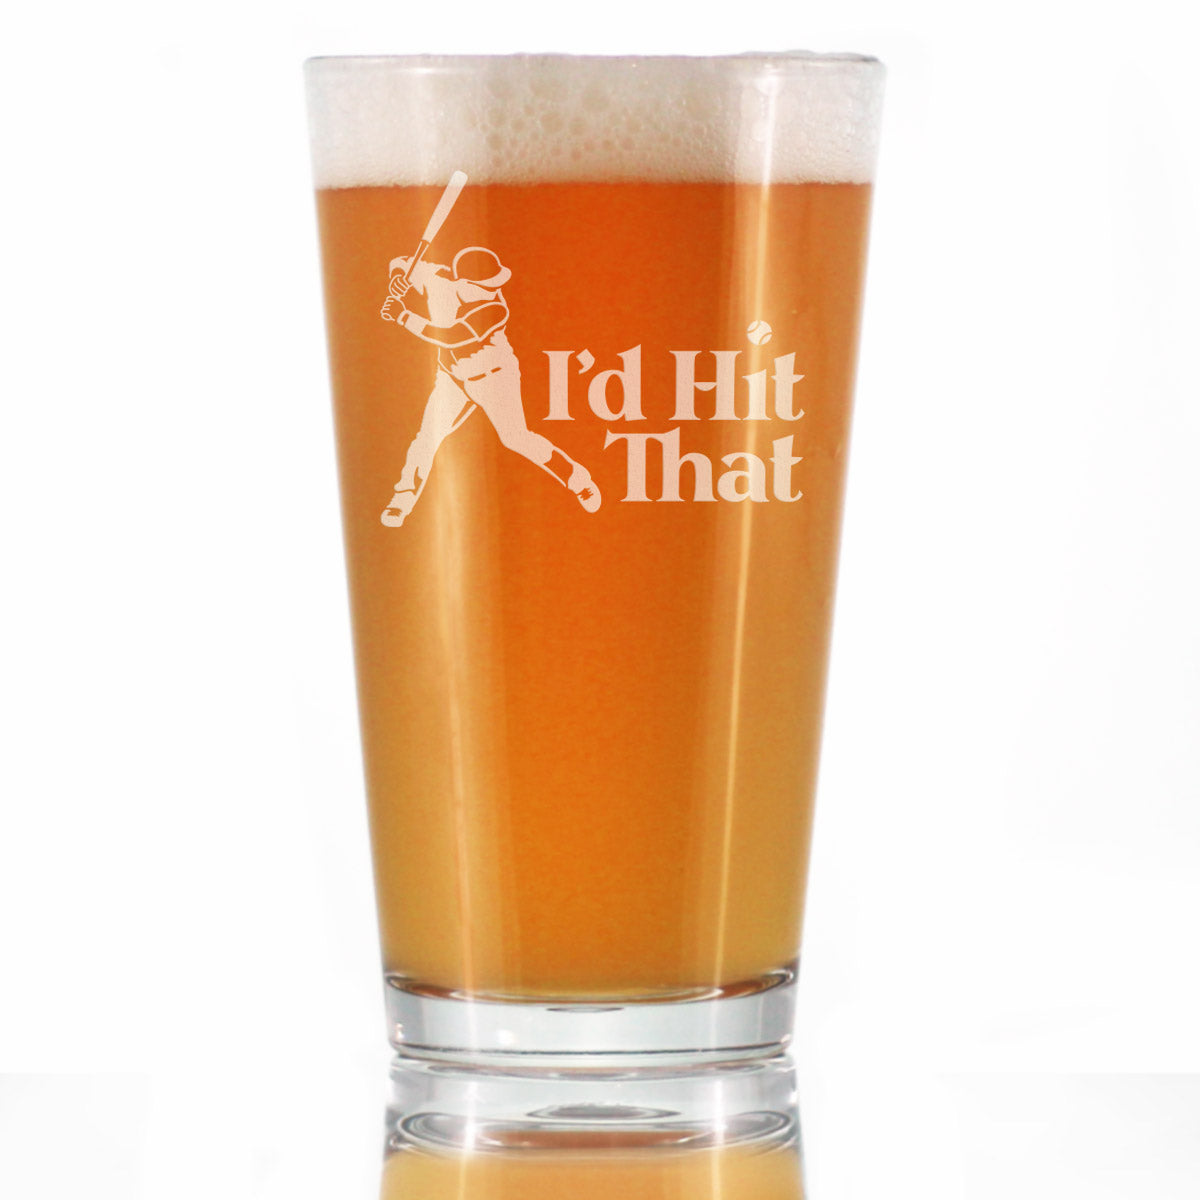 I&#39;d Hit That - Pint Glass for Beer - Baseball Themed Gifts and Sports Decor - 16 oz Glasses